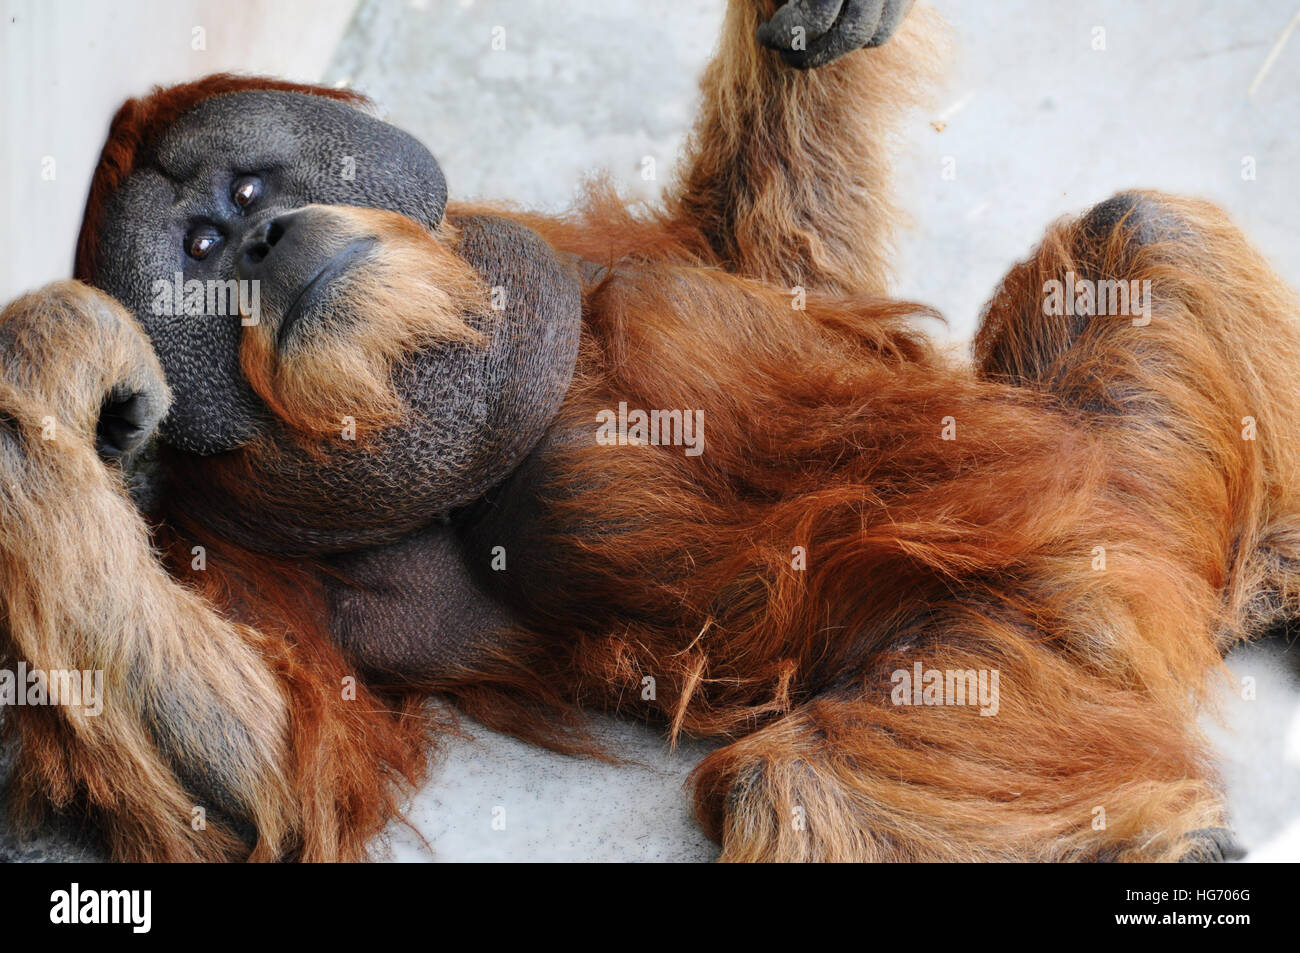 Young male orangutan in captivity, laying on his back looking at the camera. Stock Photo